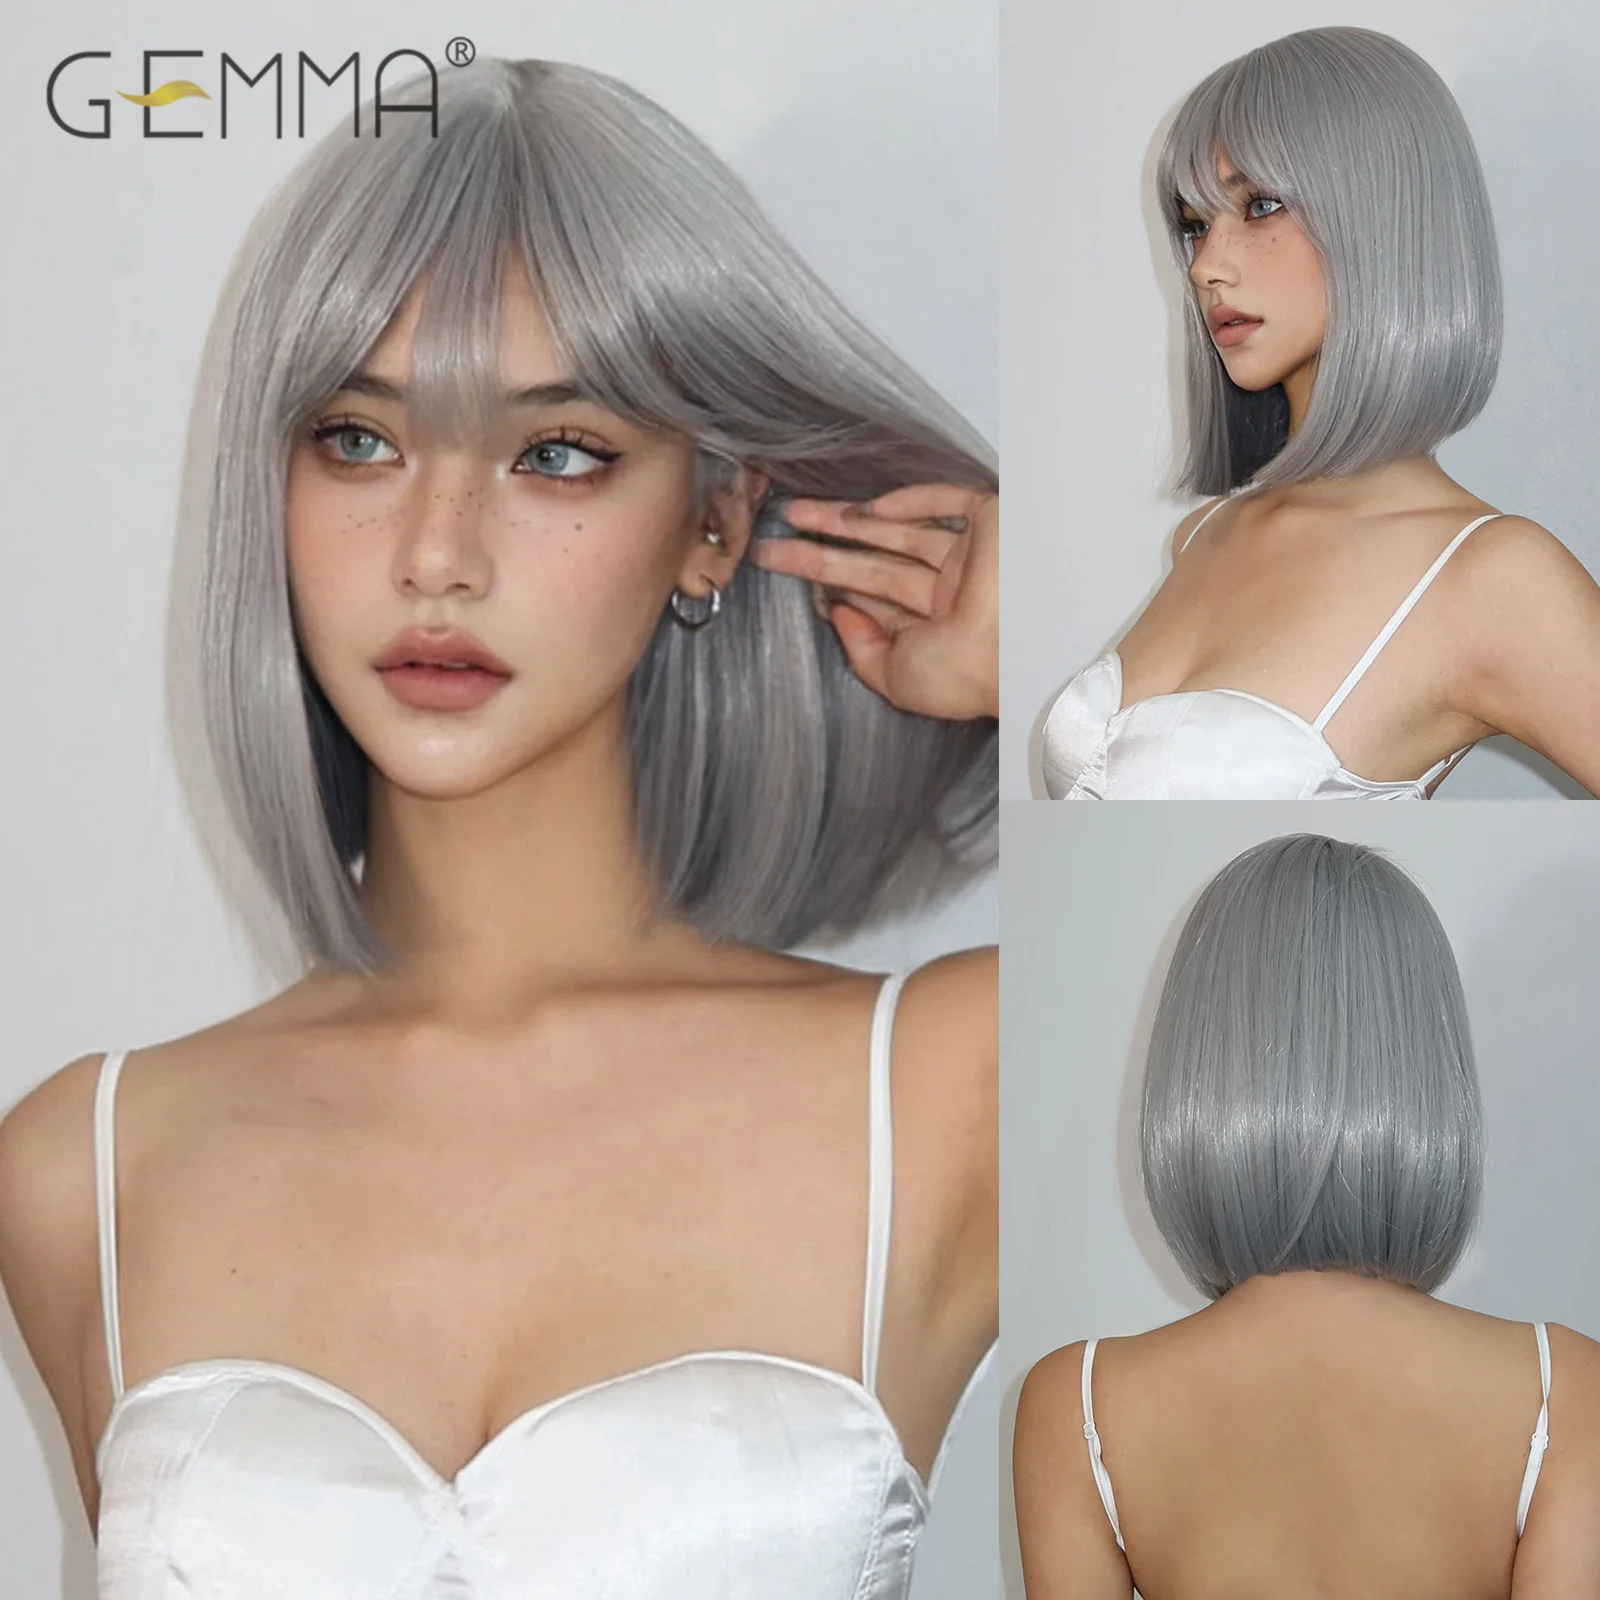 Silver Gray Short Straight Wig Synthetic Bob Wigs with Bangs for White Women Cosplay Daily Use Wig Natural Hair Heat Resistant la sylphide synthetic wig long deep wave root dark brown ombre brown wigs with bangs for women party daily wig heat resistant